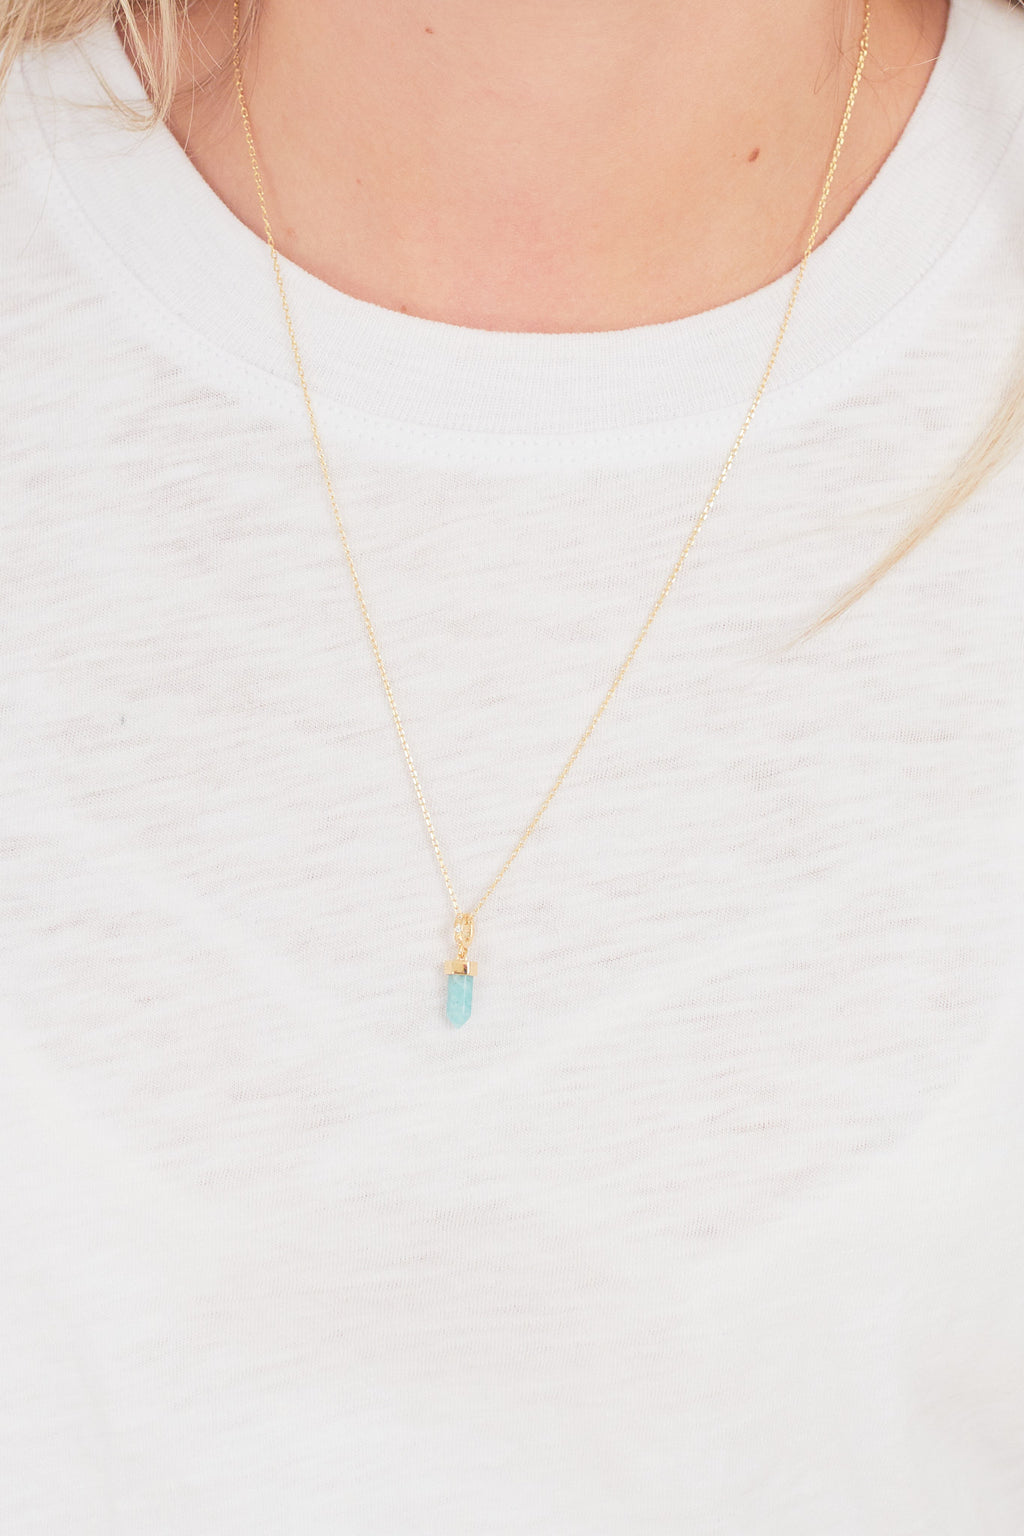 Intention Of Truth Amazonite Necklace